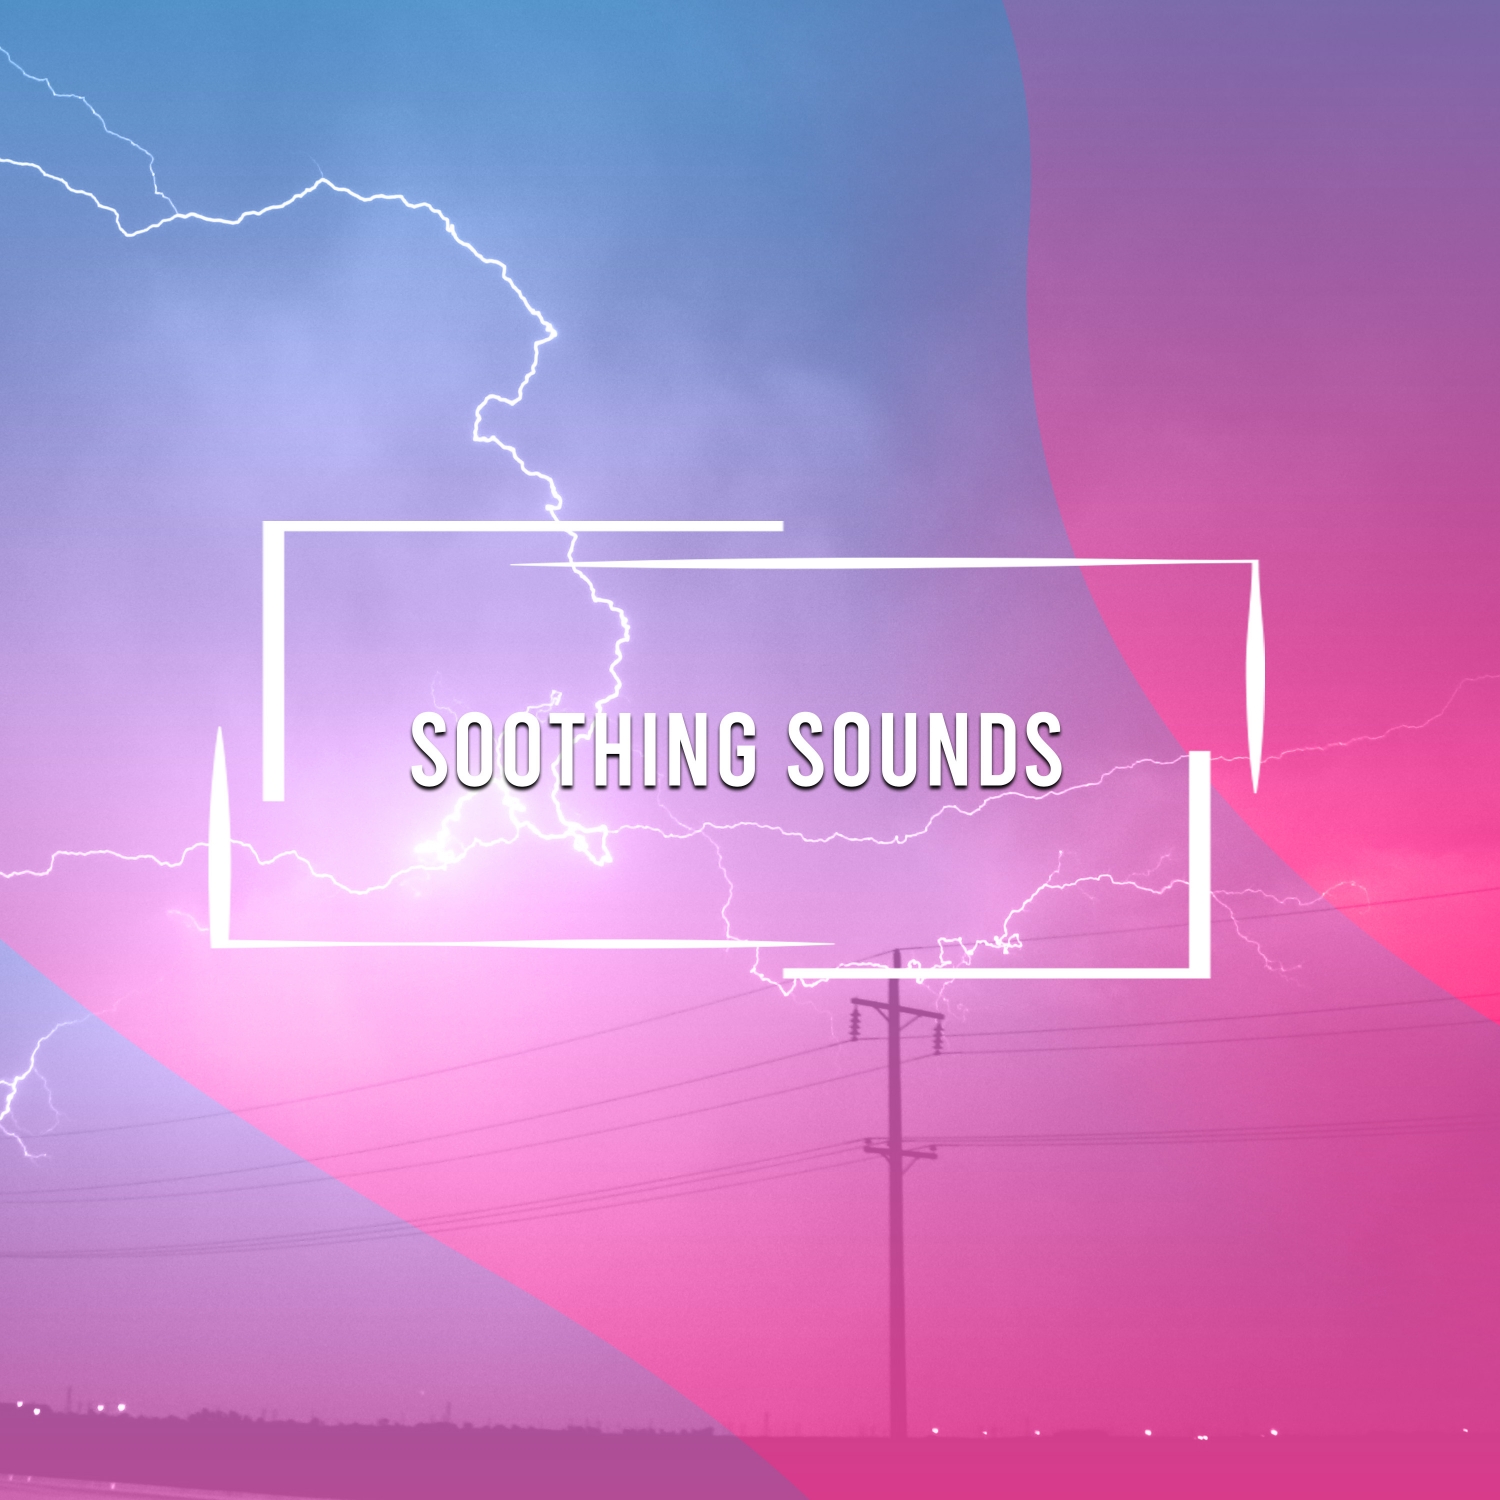 19 Soothing White Noise and Rain Sounds